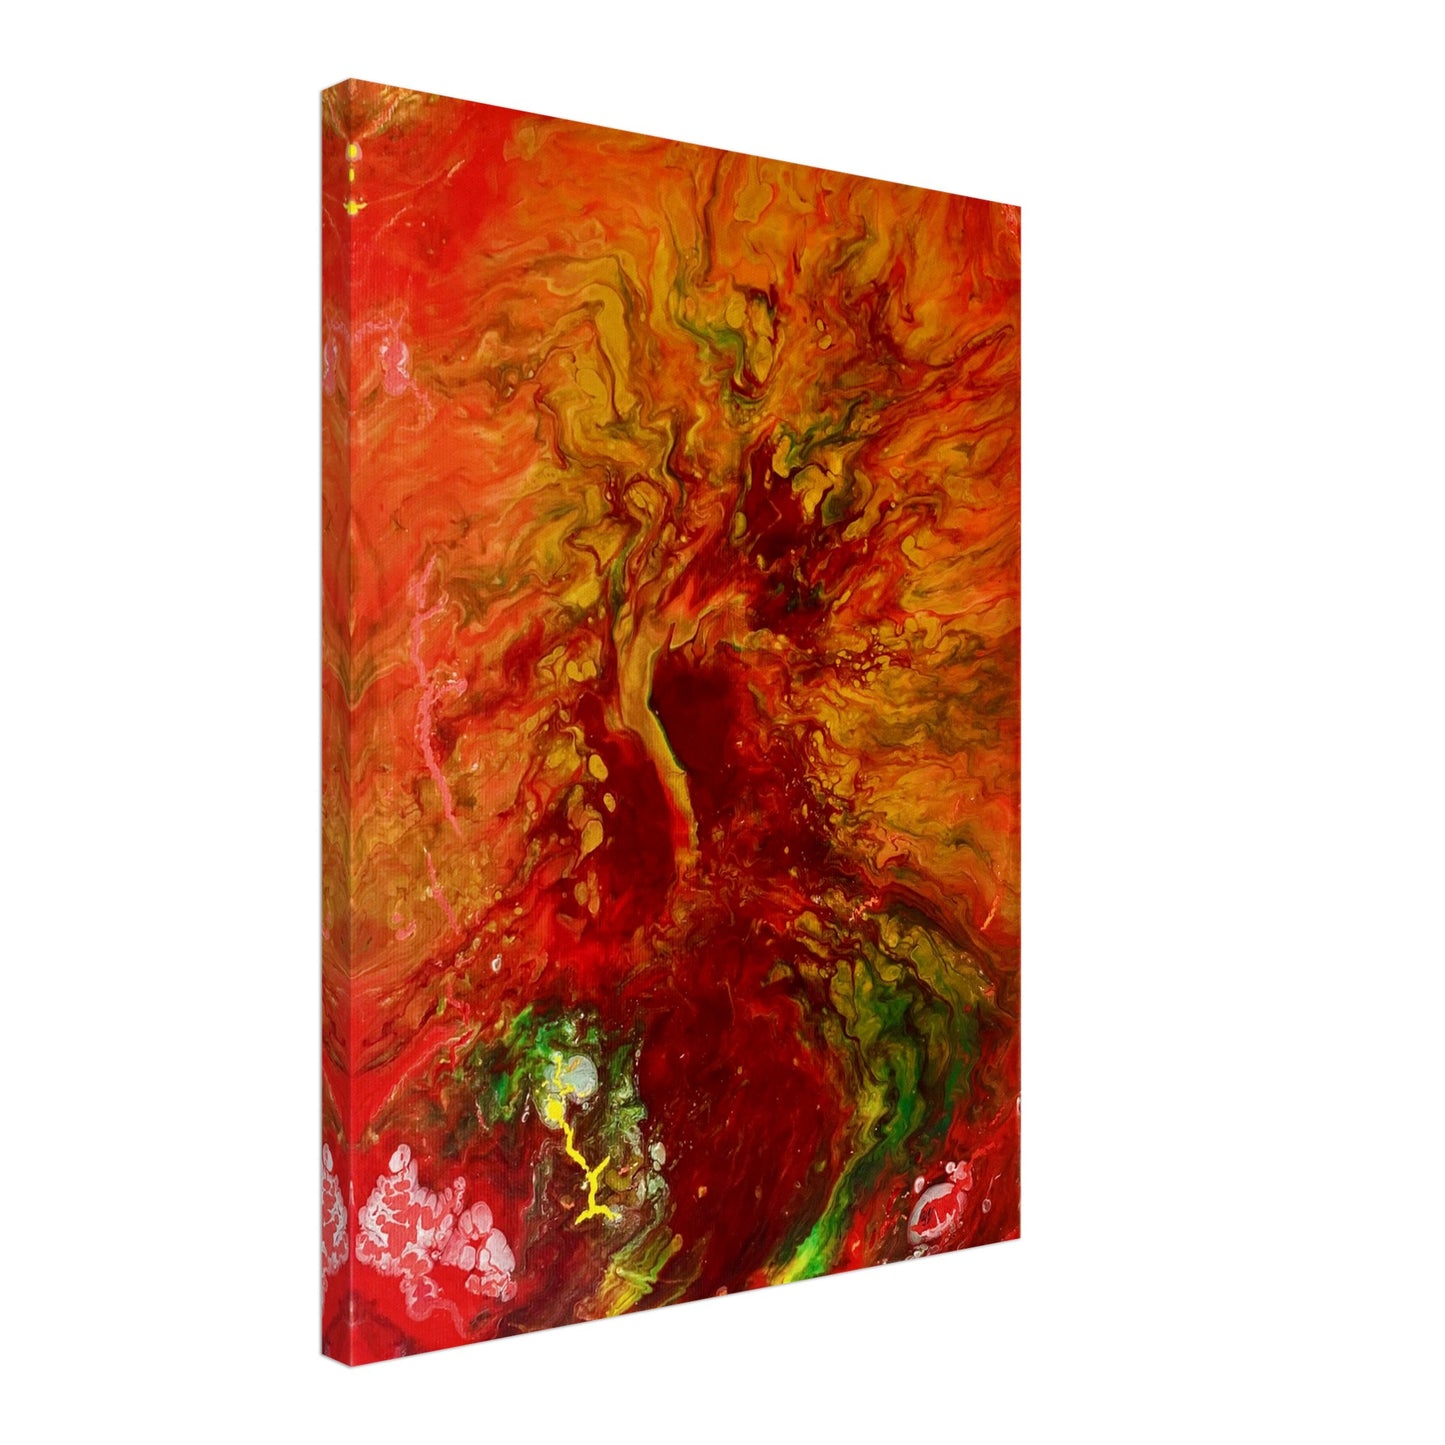 Close-up of 'The Tree of Life' canvas print, a fiery blend of red and green hues, symbolizing vitality, available in Yana Virtuoso's art shop.